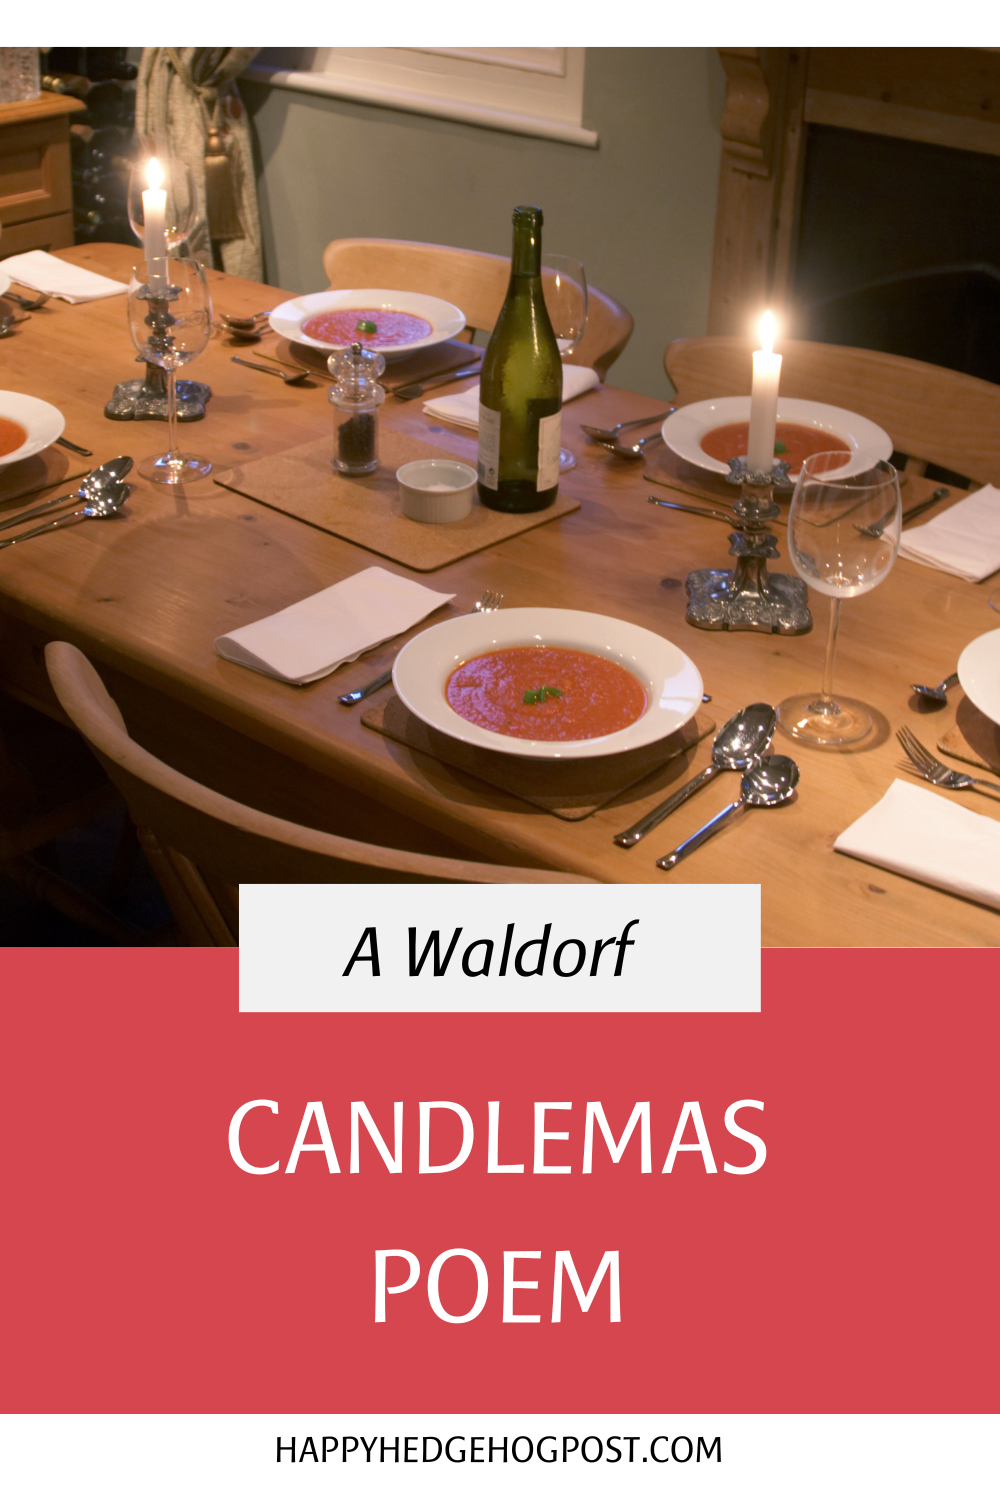 A Candlelit Meal and Poetry for Candlemas